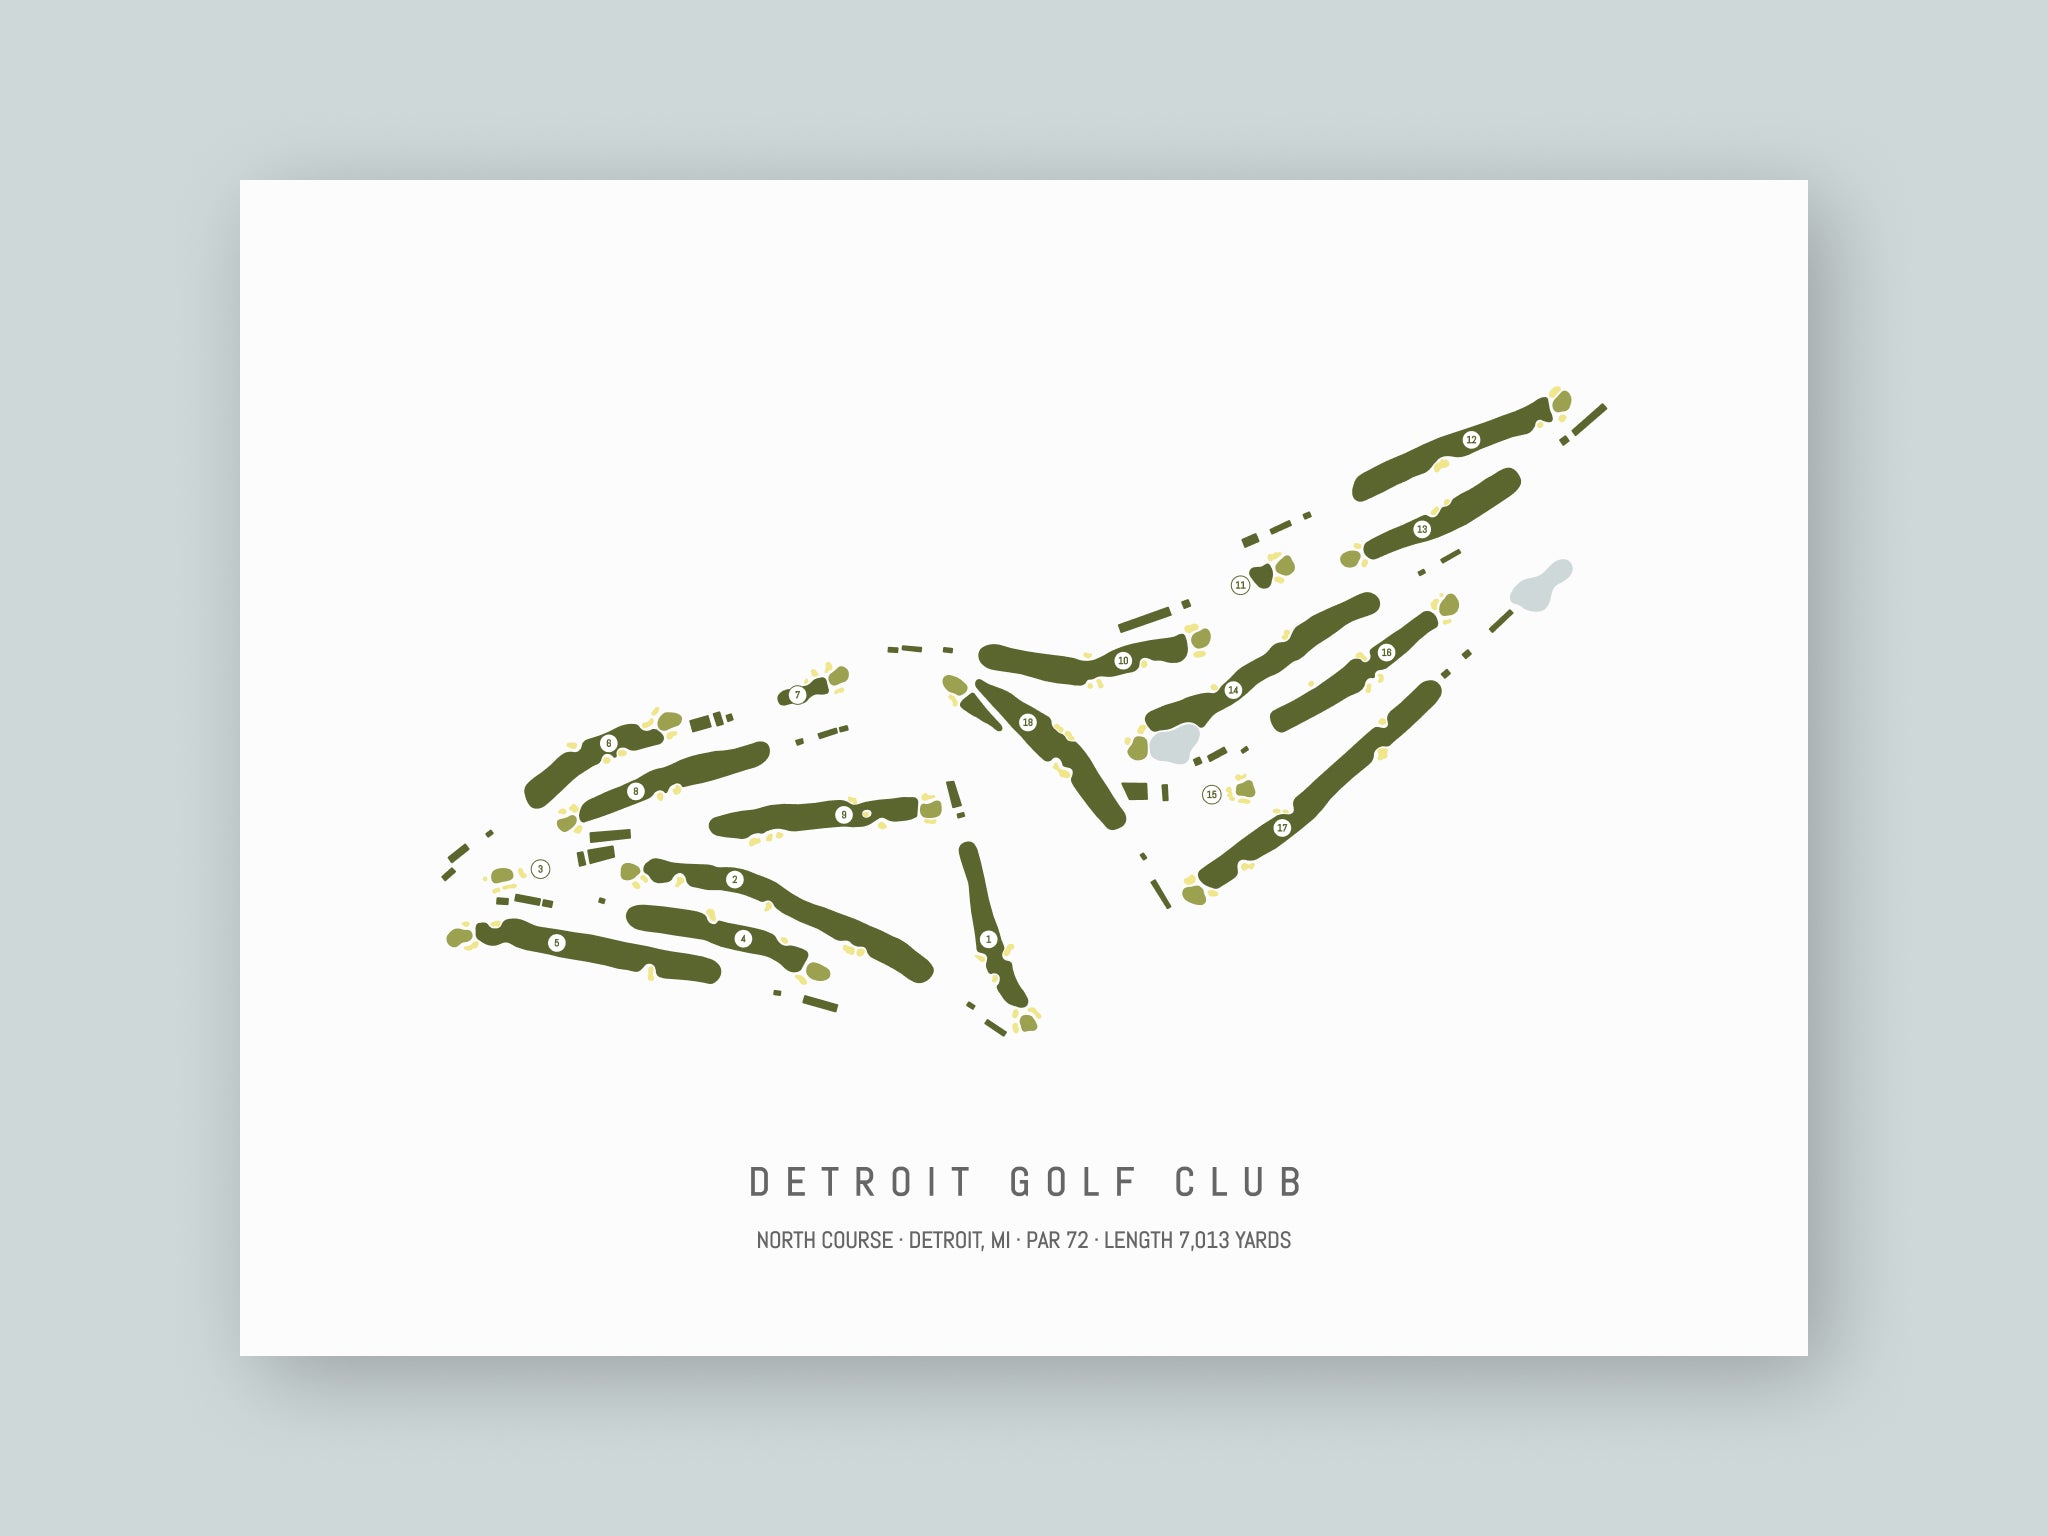 Detroit-Golf-Club-North-Course-MI--Unframed-24x18-With-Hole-Numbers